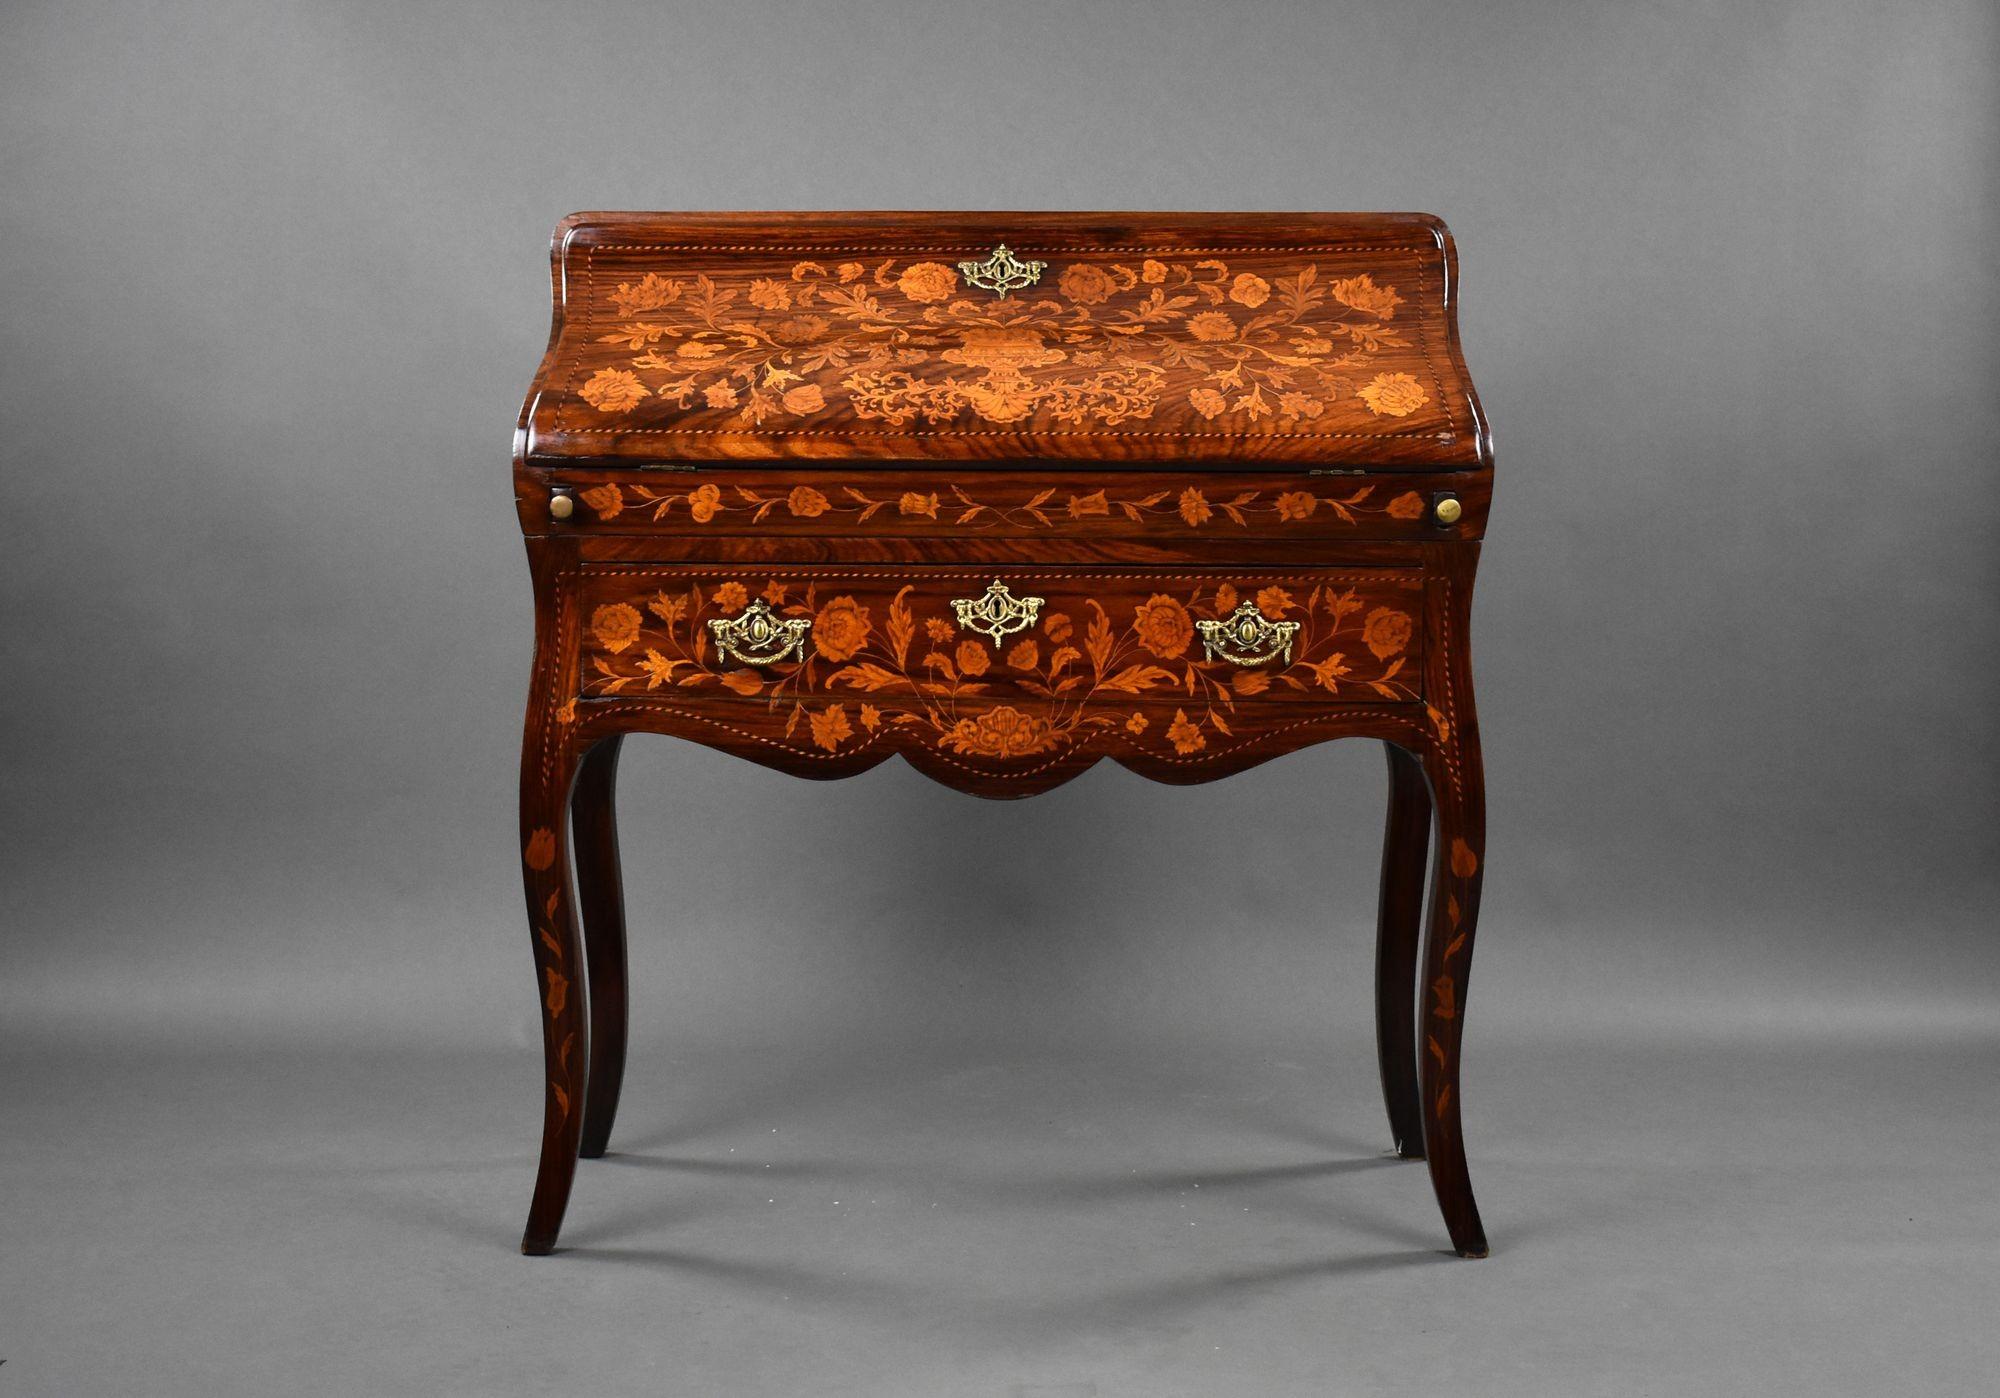 For sale is an 19th century Dutch Marquetry Bureau. The sloping fall inlaid with flowers enclosing a shaped interior of drawers and pigeon holes. The bureau stands on nice cabriole legs and the top separates from the base for ease of transport.
